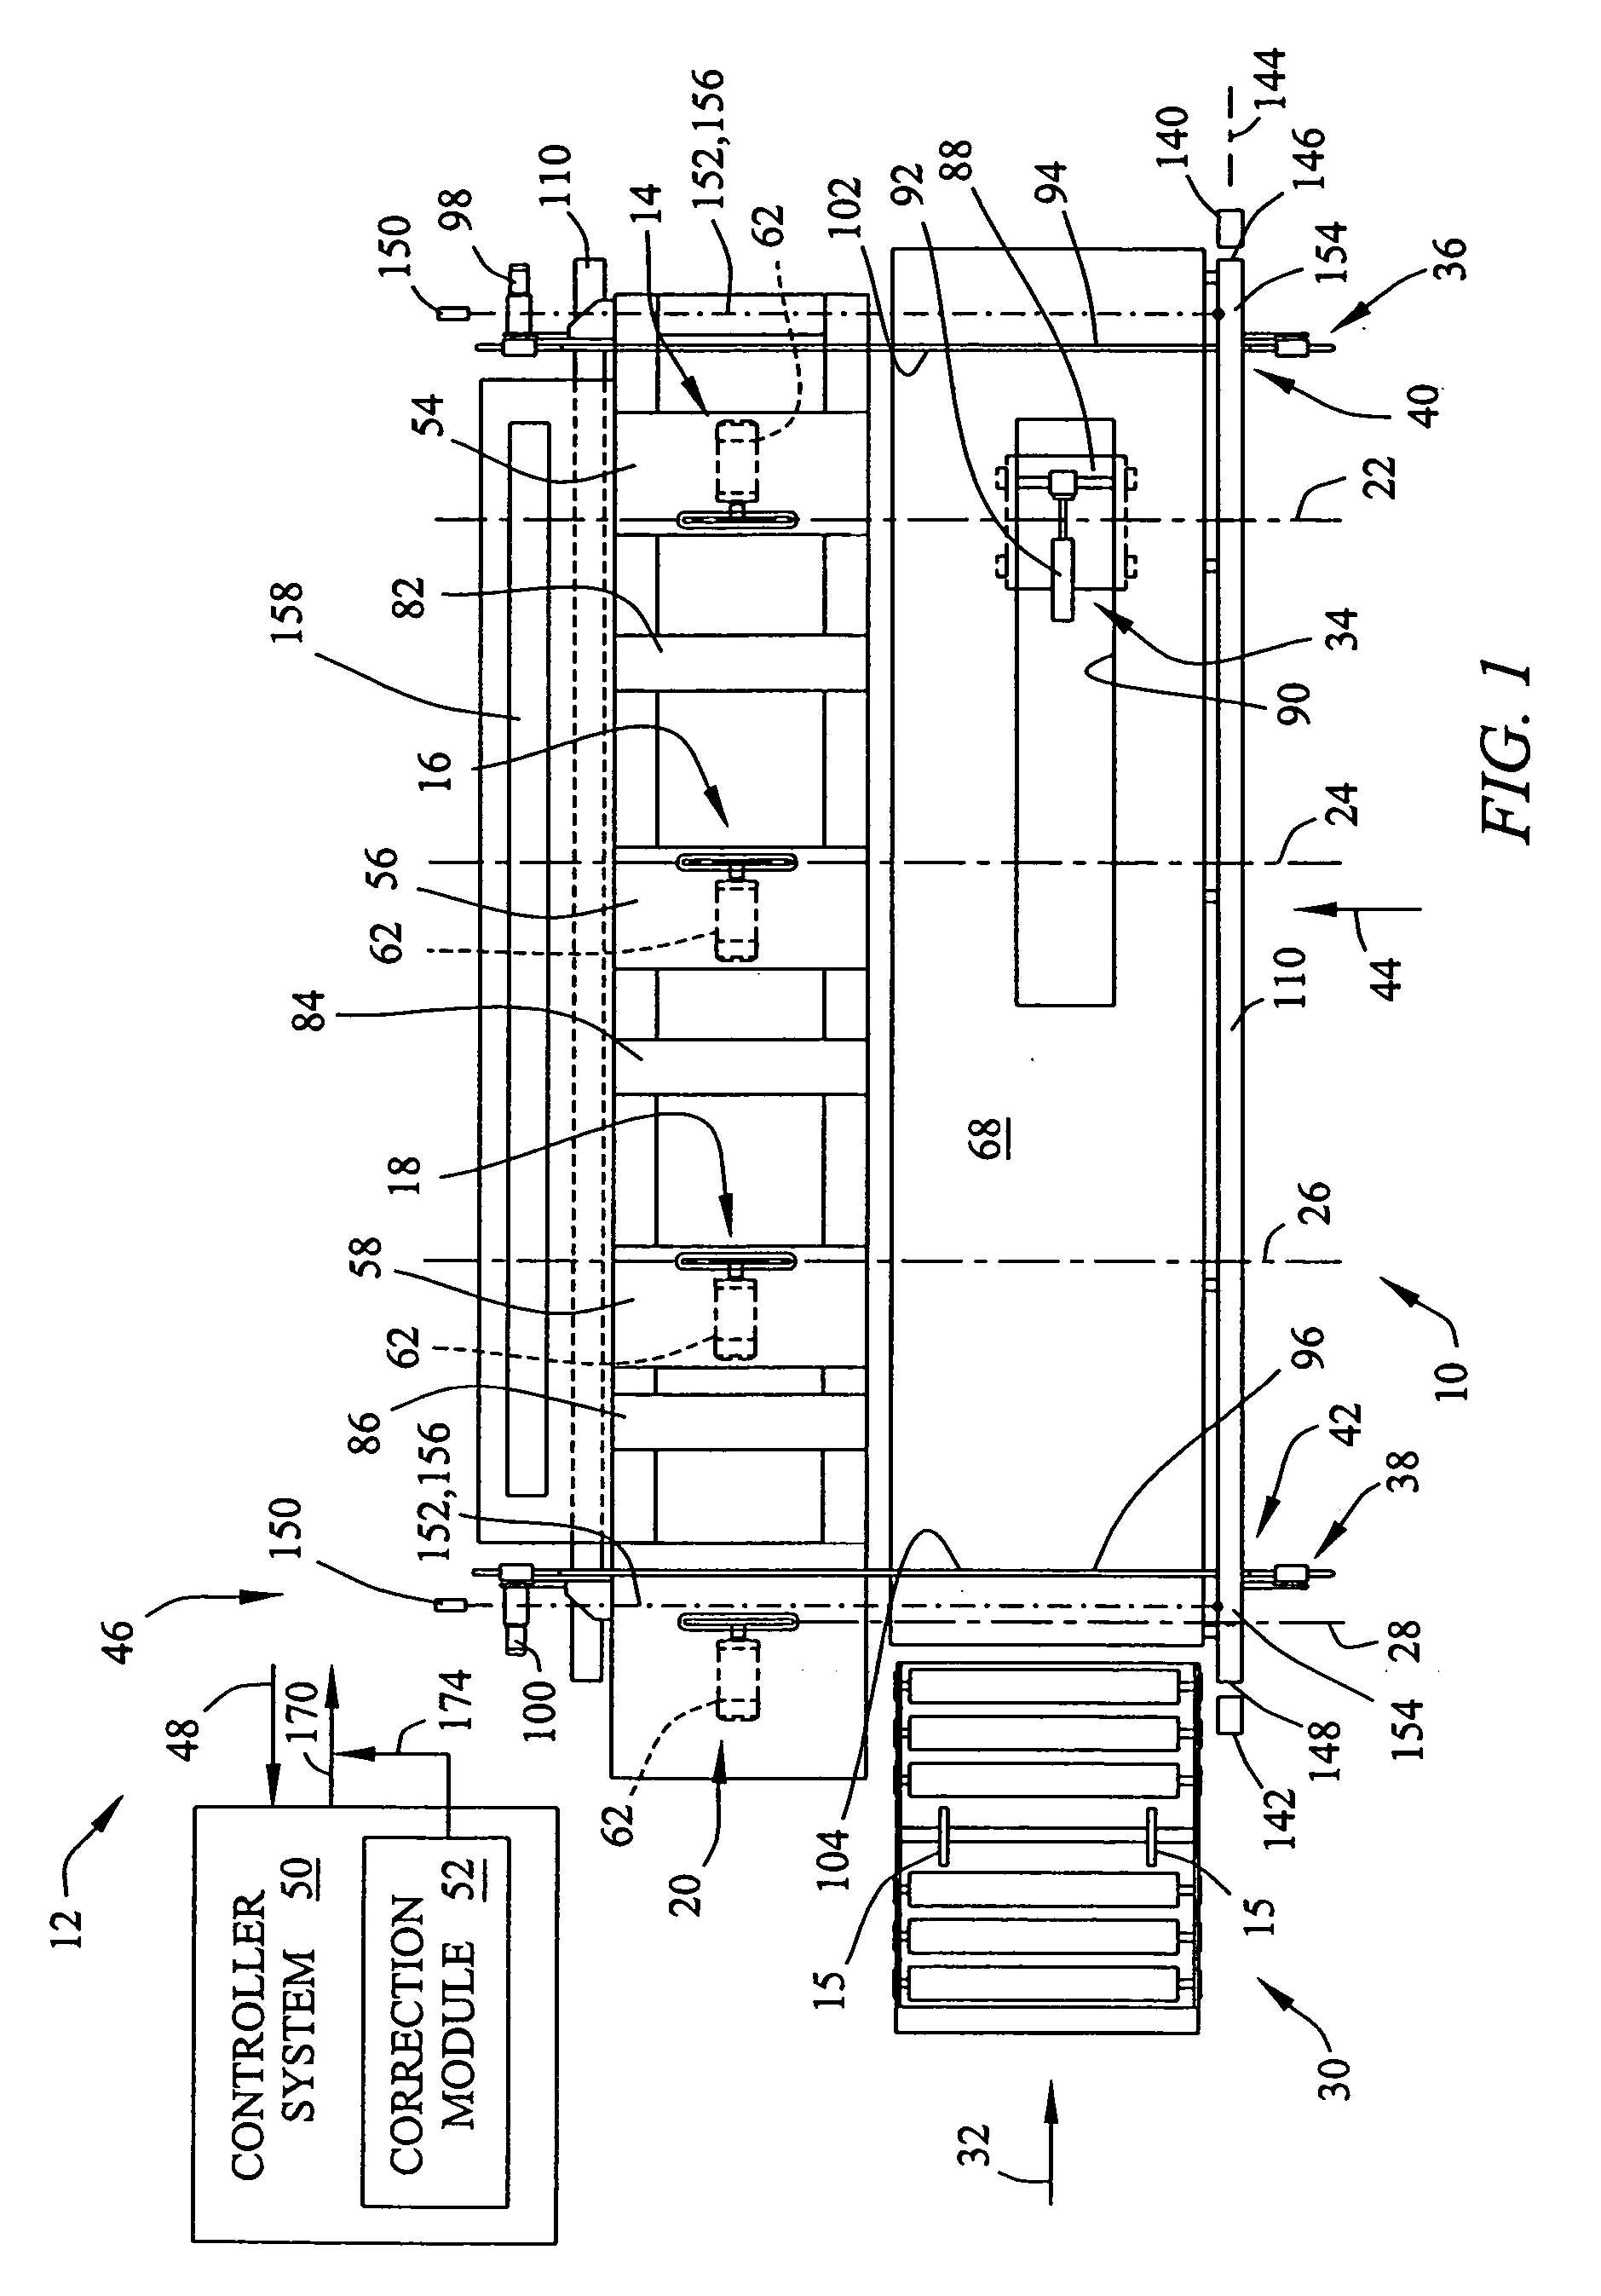 Systems and methods for end squaring and dividing elongated materials